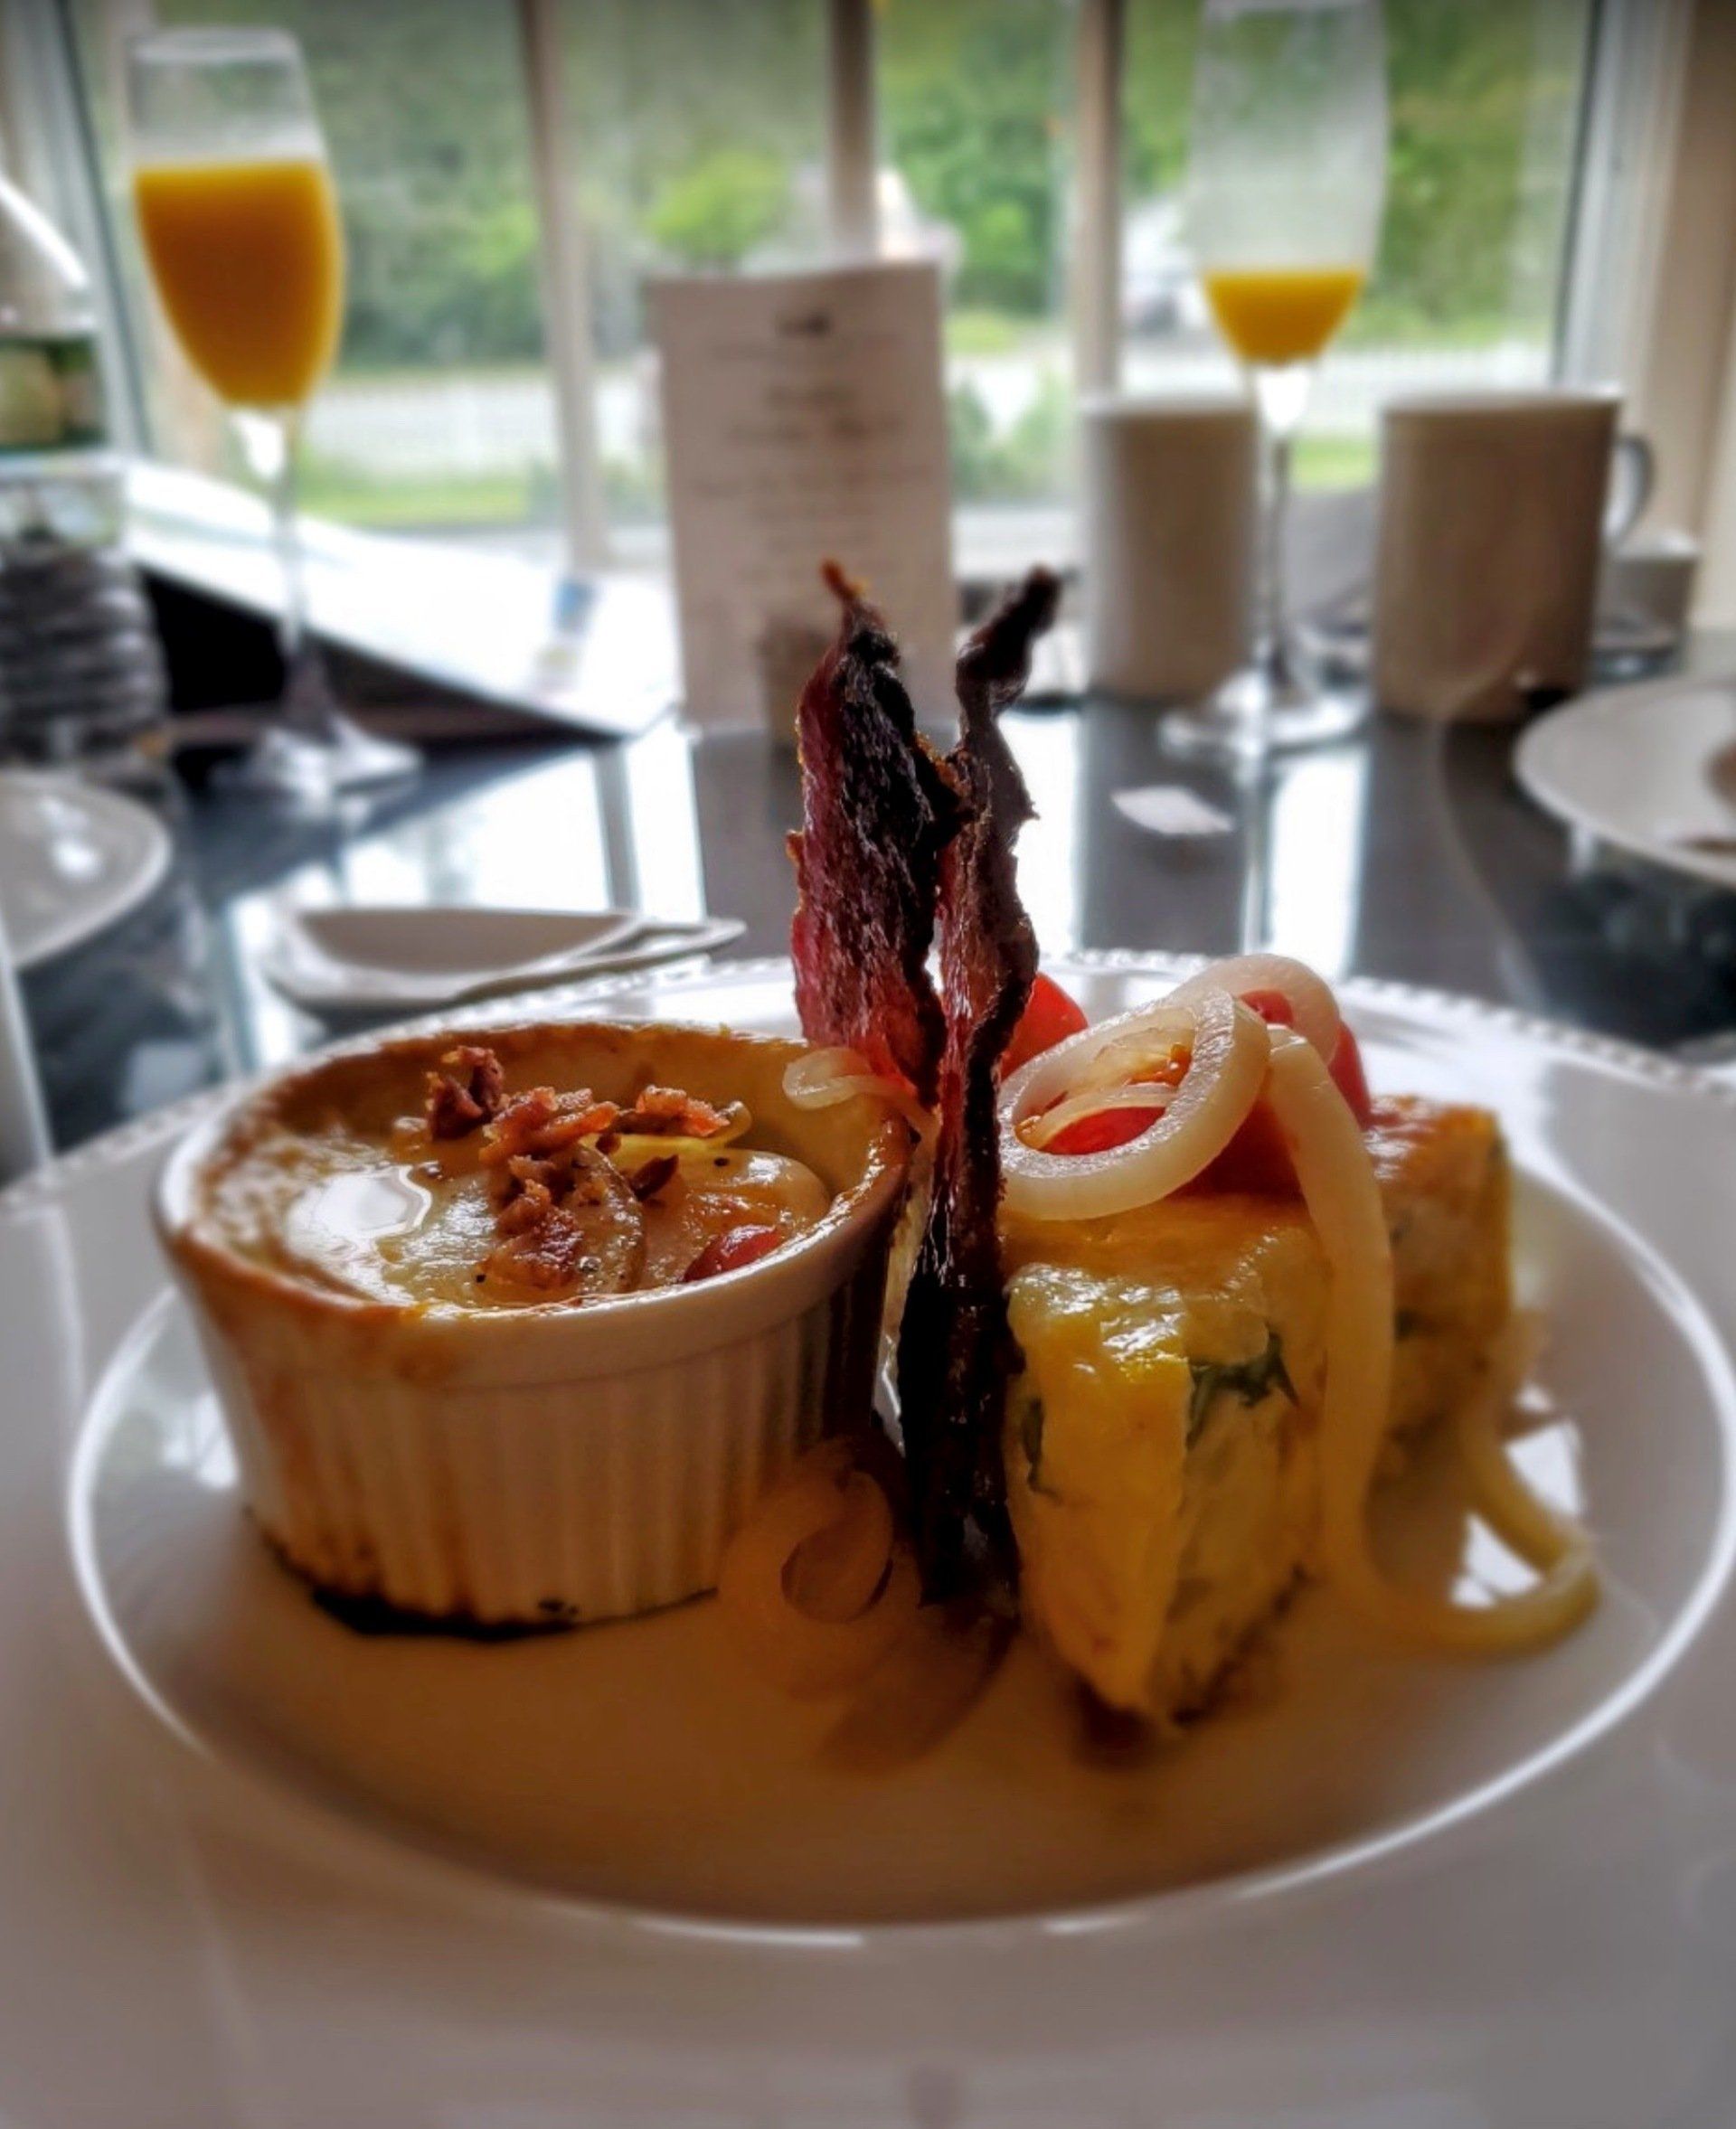 Breakfast at Coach Stop Inn - vegetable frittata with candied bacon